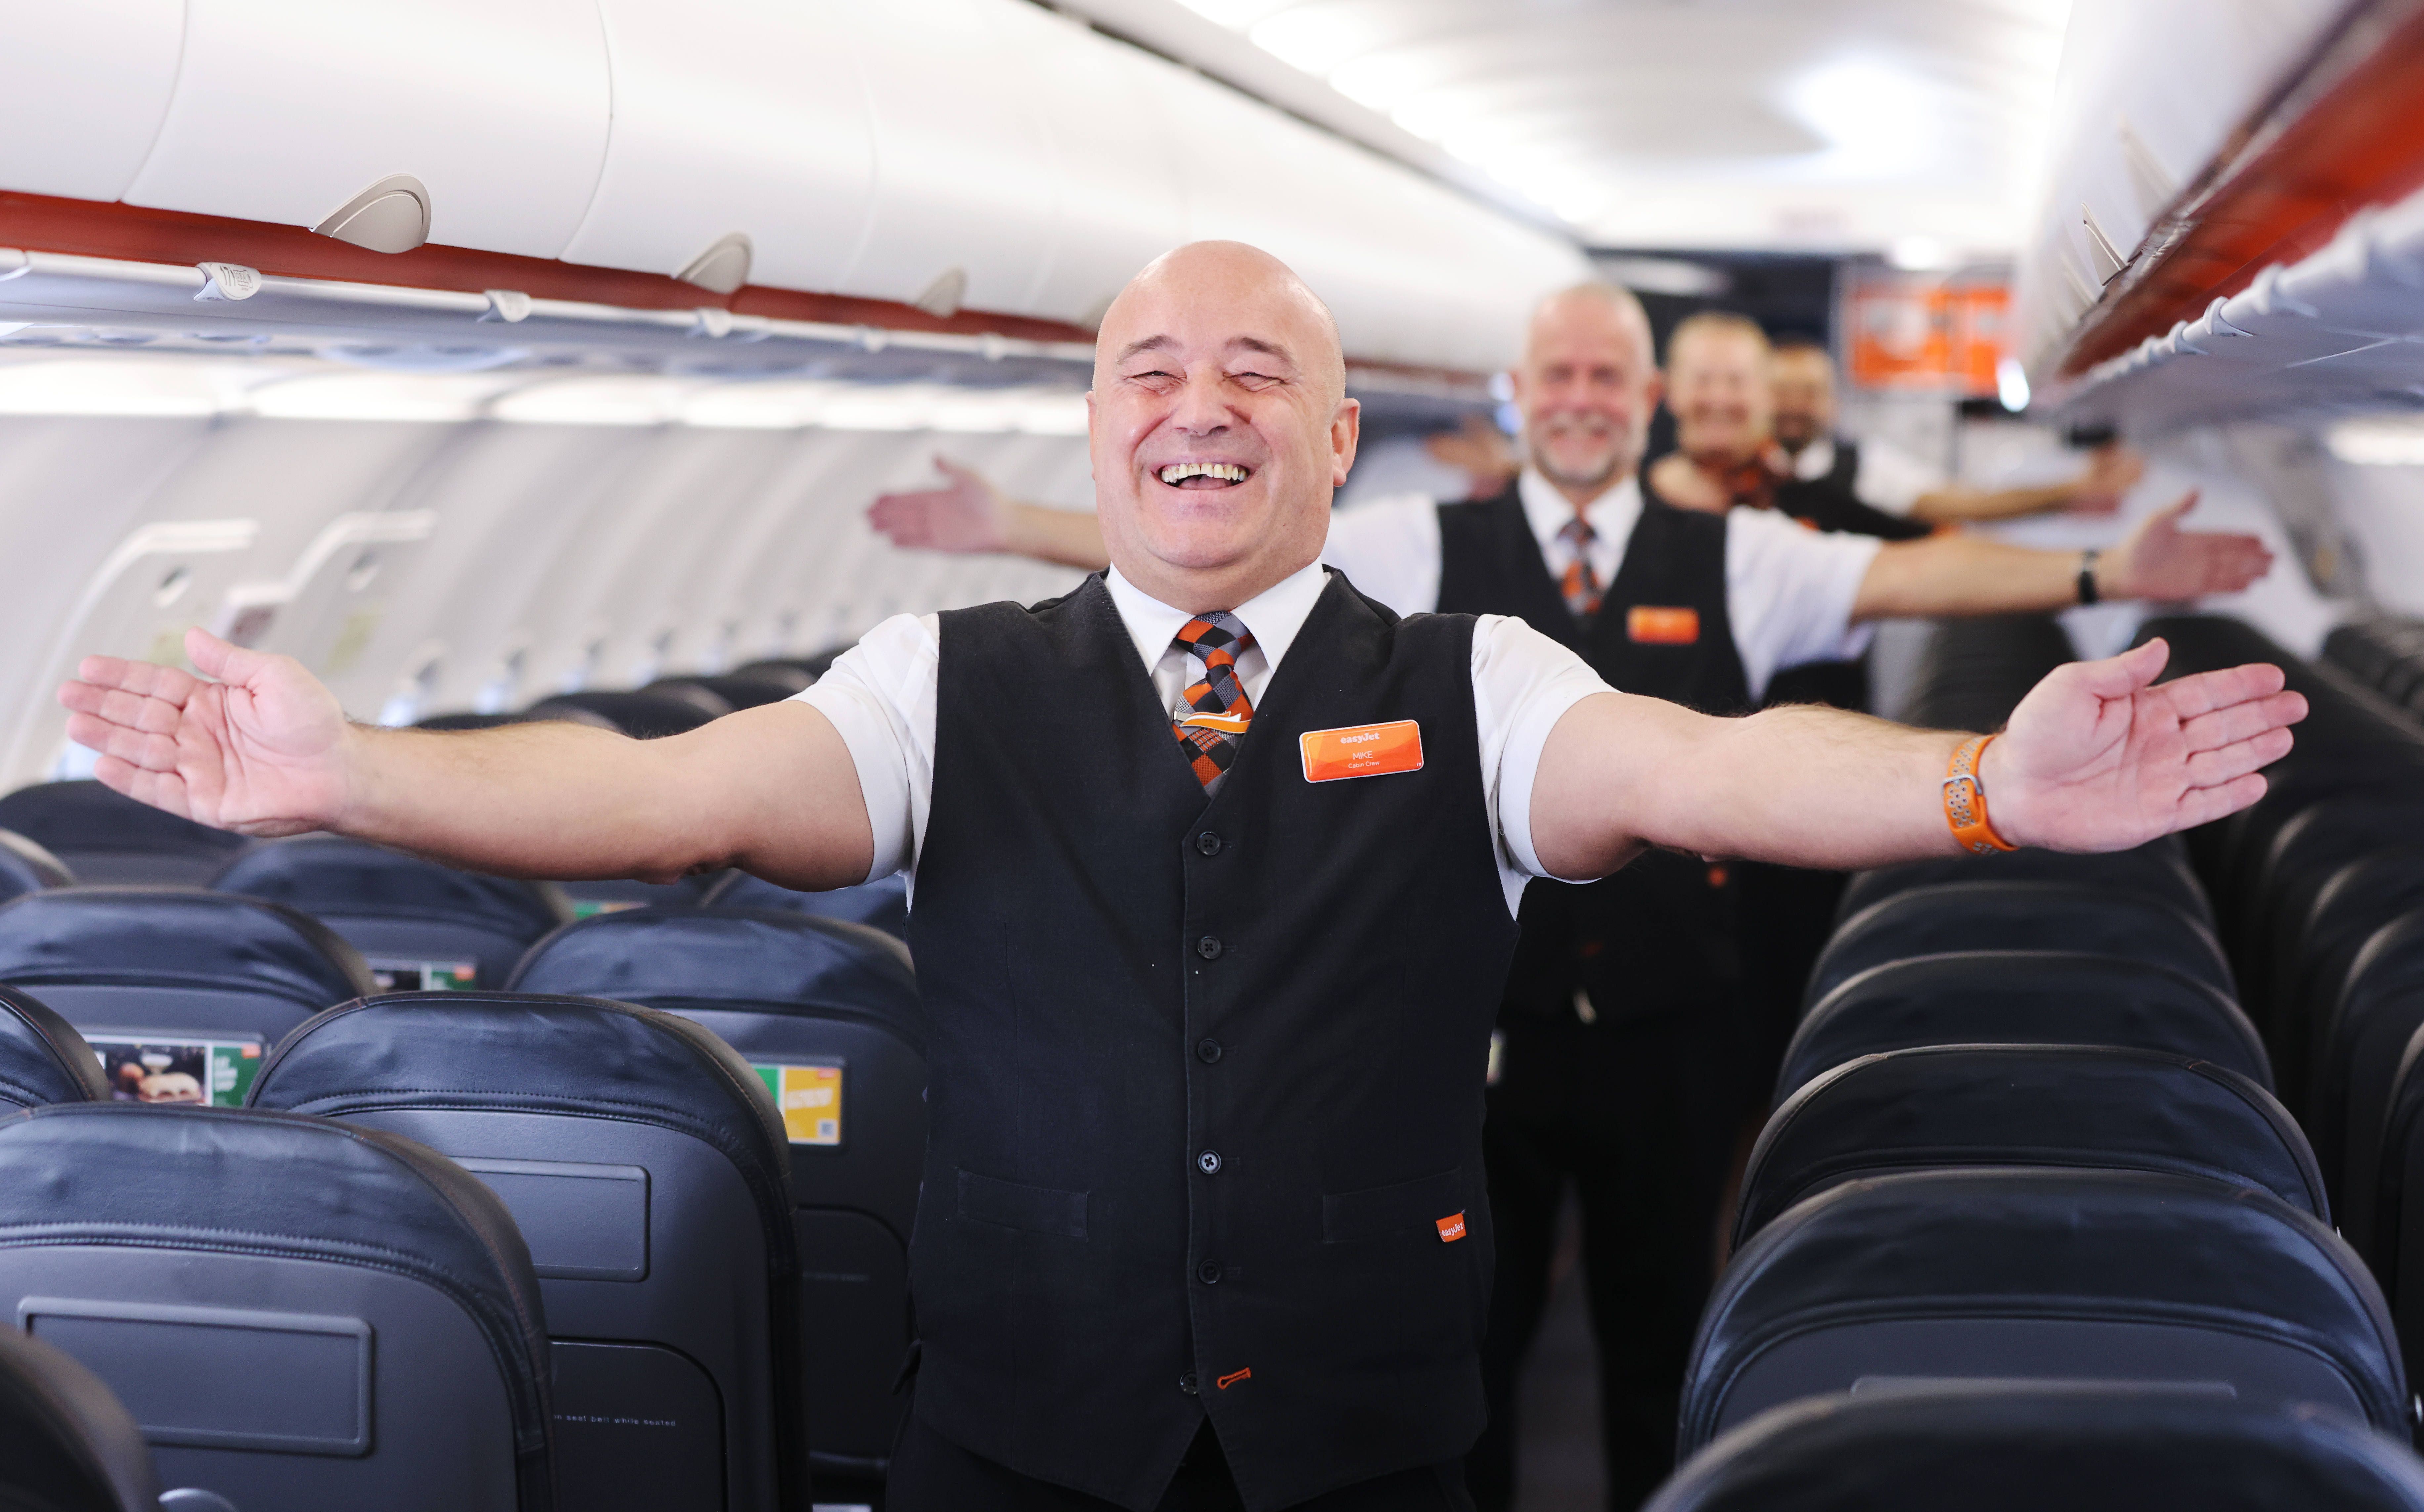 easyJet is encouraging adults over the age of 45 to join the airline